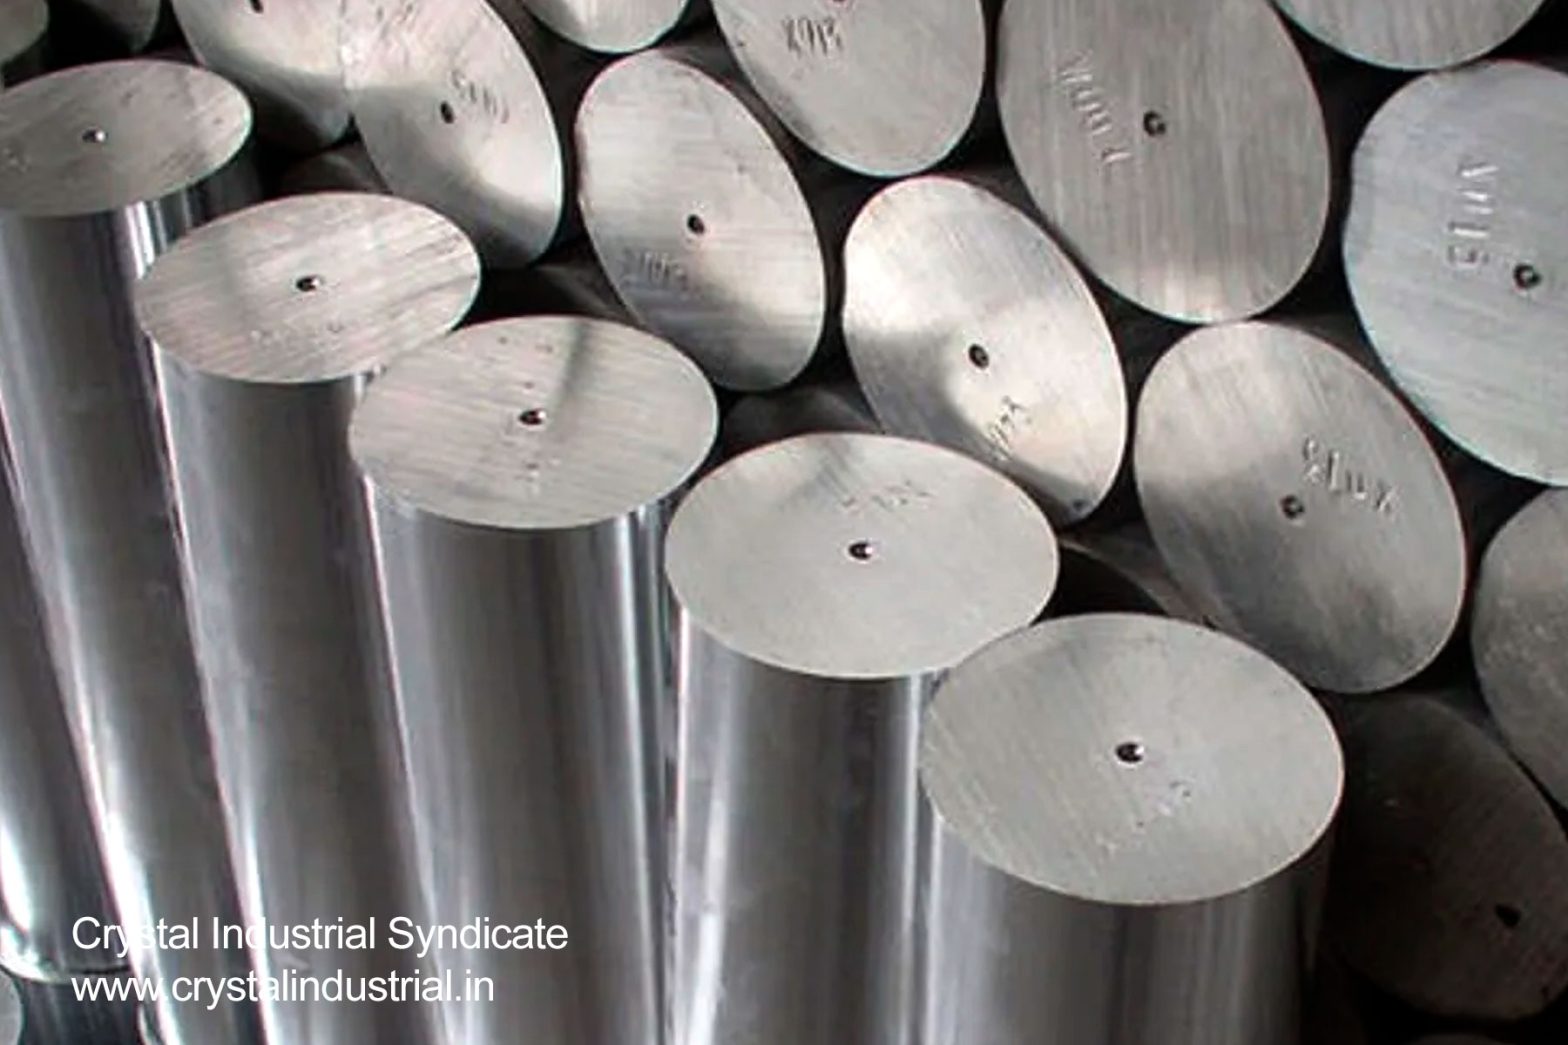 Advantages of inconel-bodied injection quills